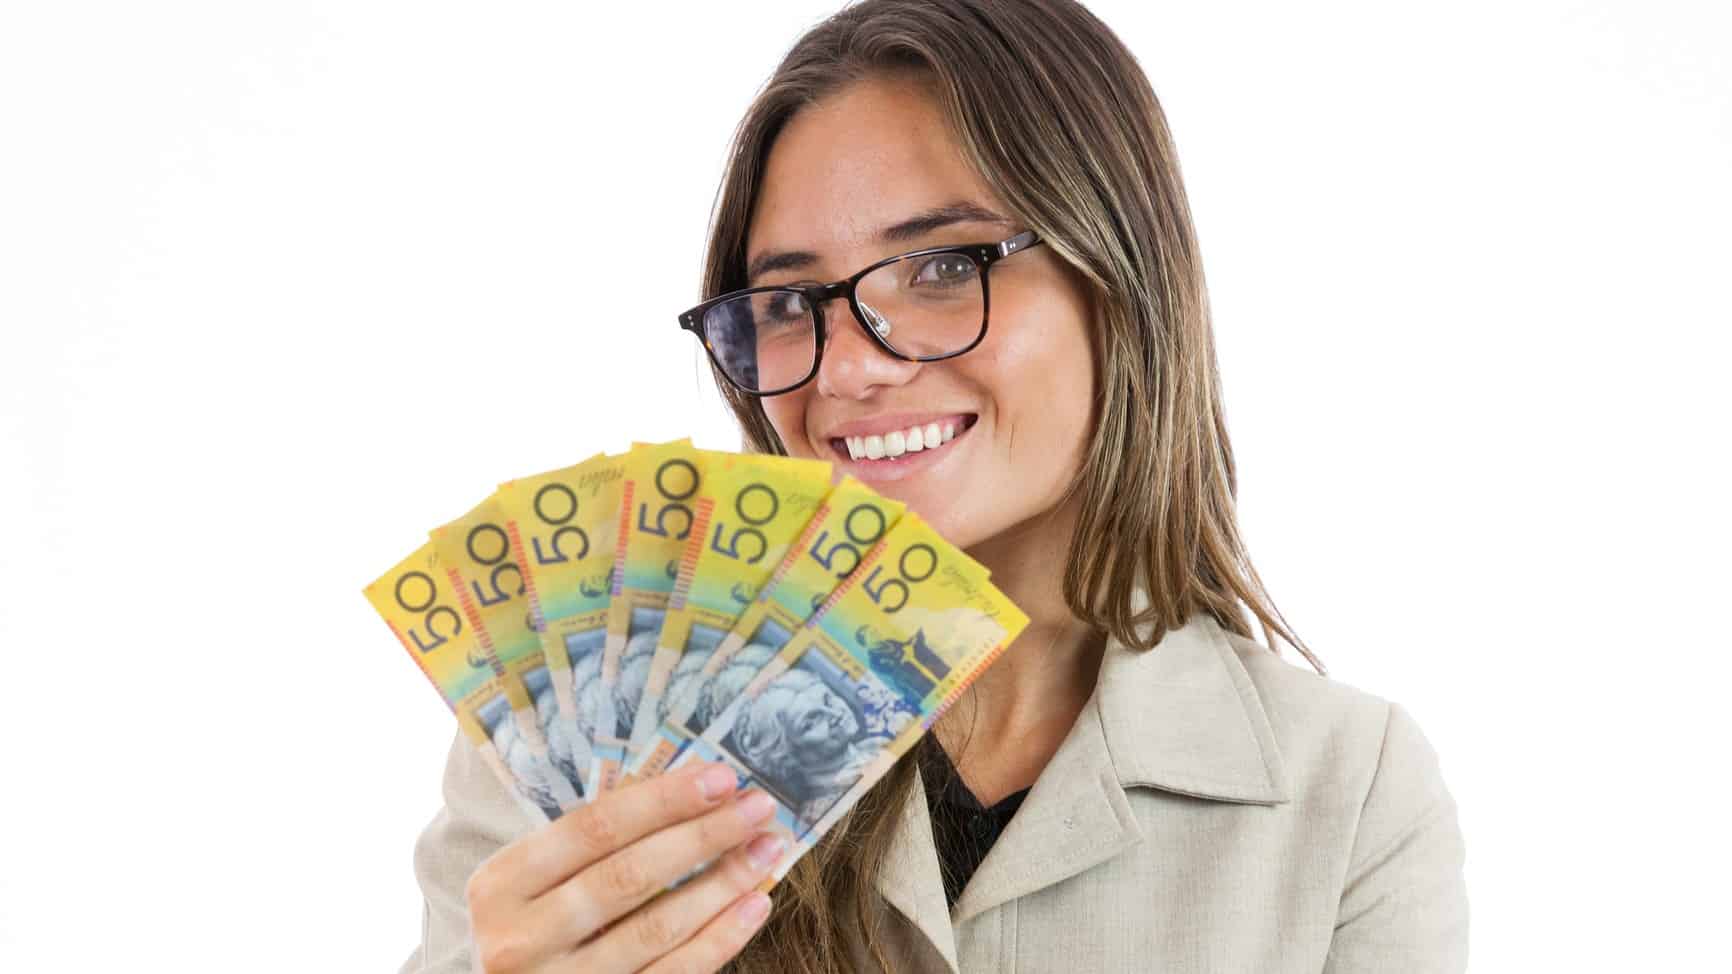 Woman holding $50 notes and smiling.